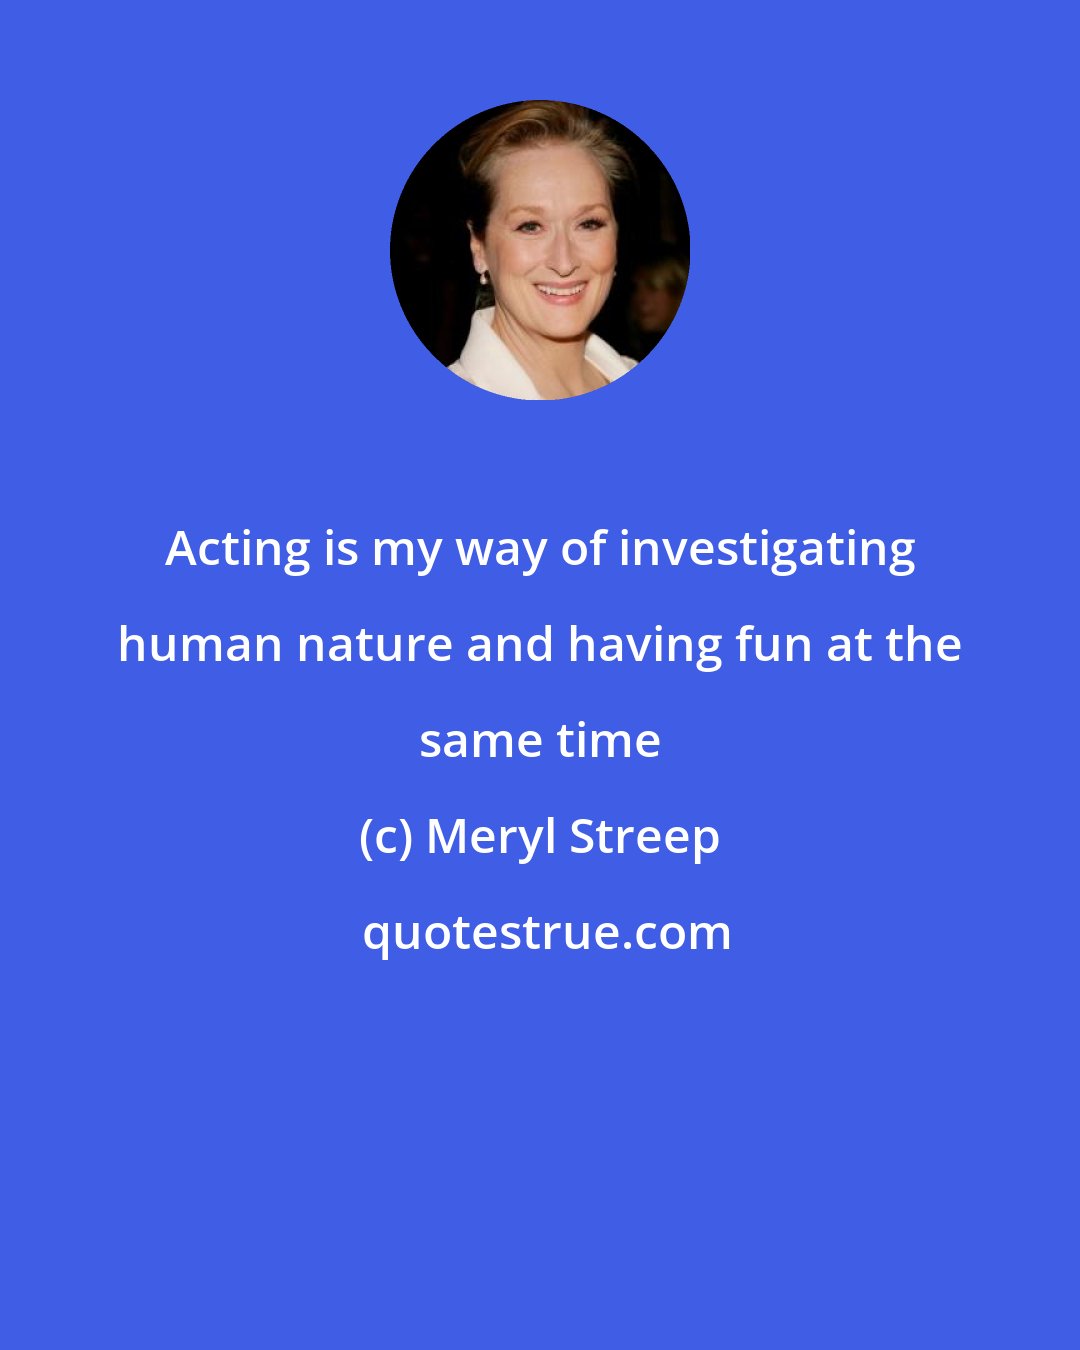 Meryl Streep: Acting is my way of investigating human nature and having fun at the same time